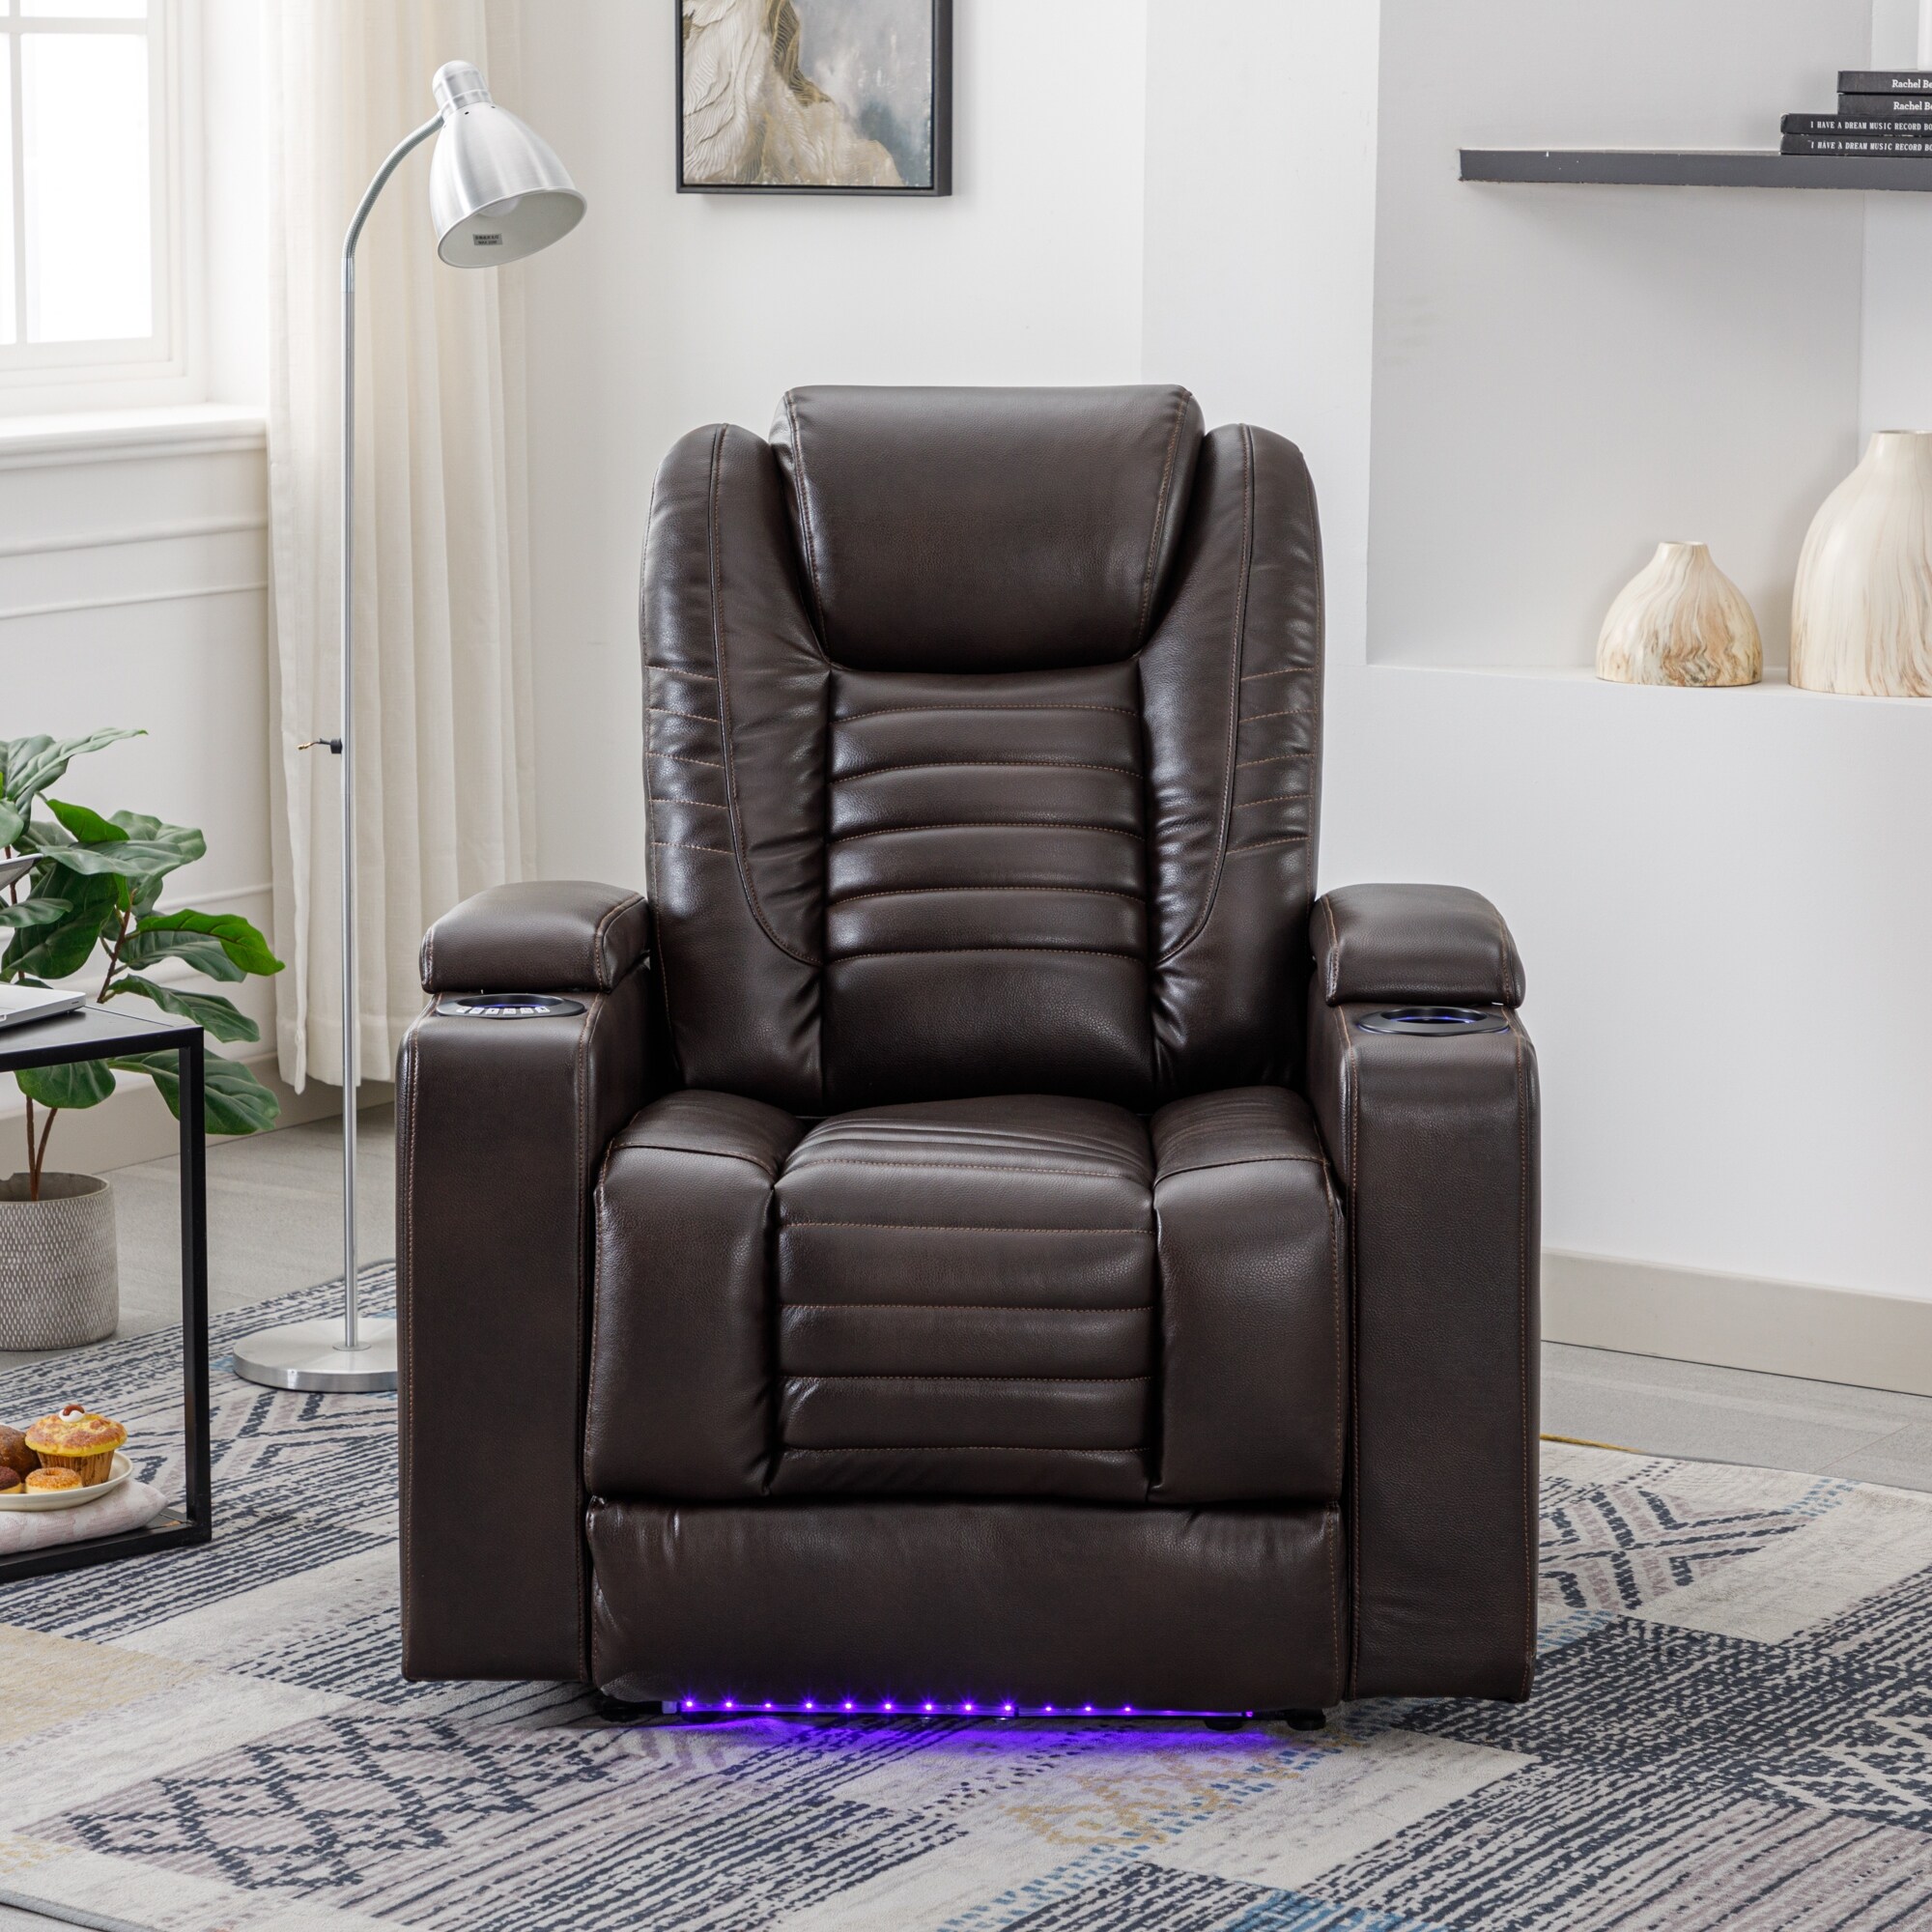 Light Grey Modern Leather Recliner with Storage